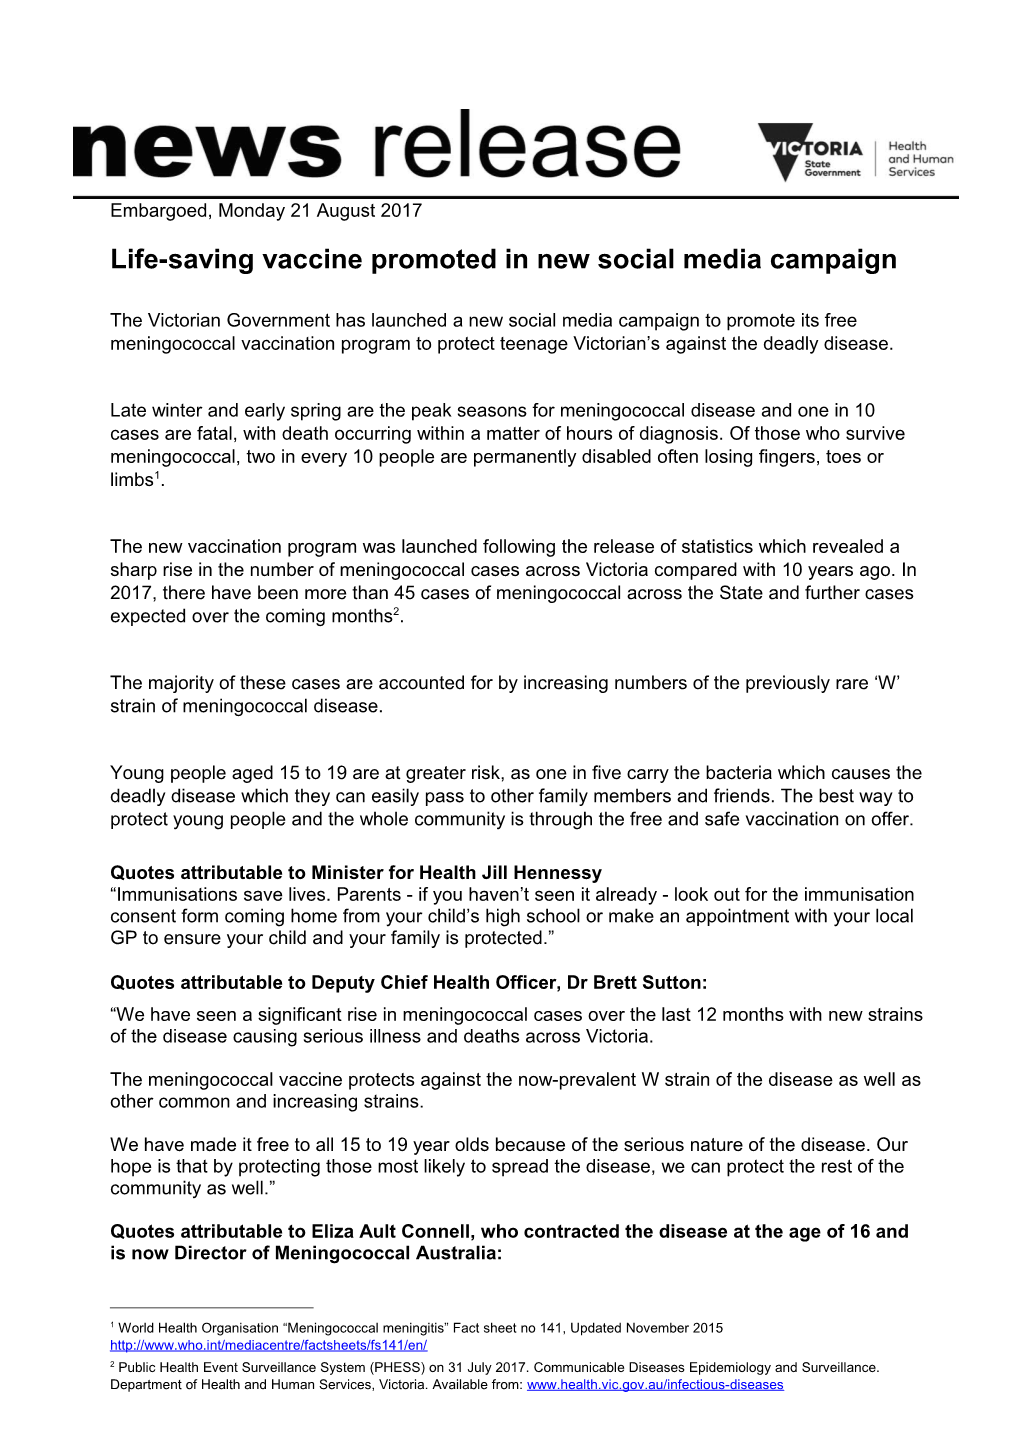 Life-Saving Vaccine Promoted in New Social Media Campaign